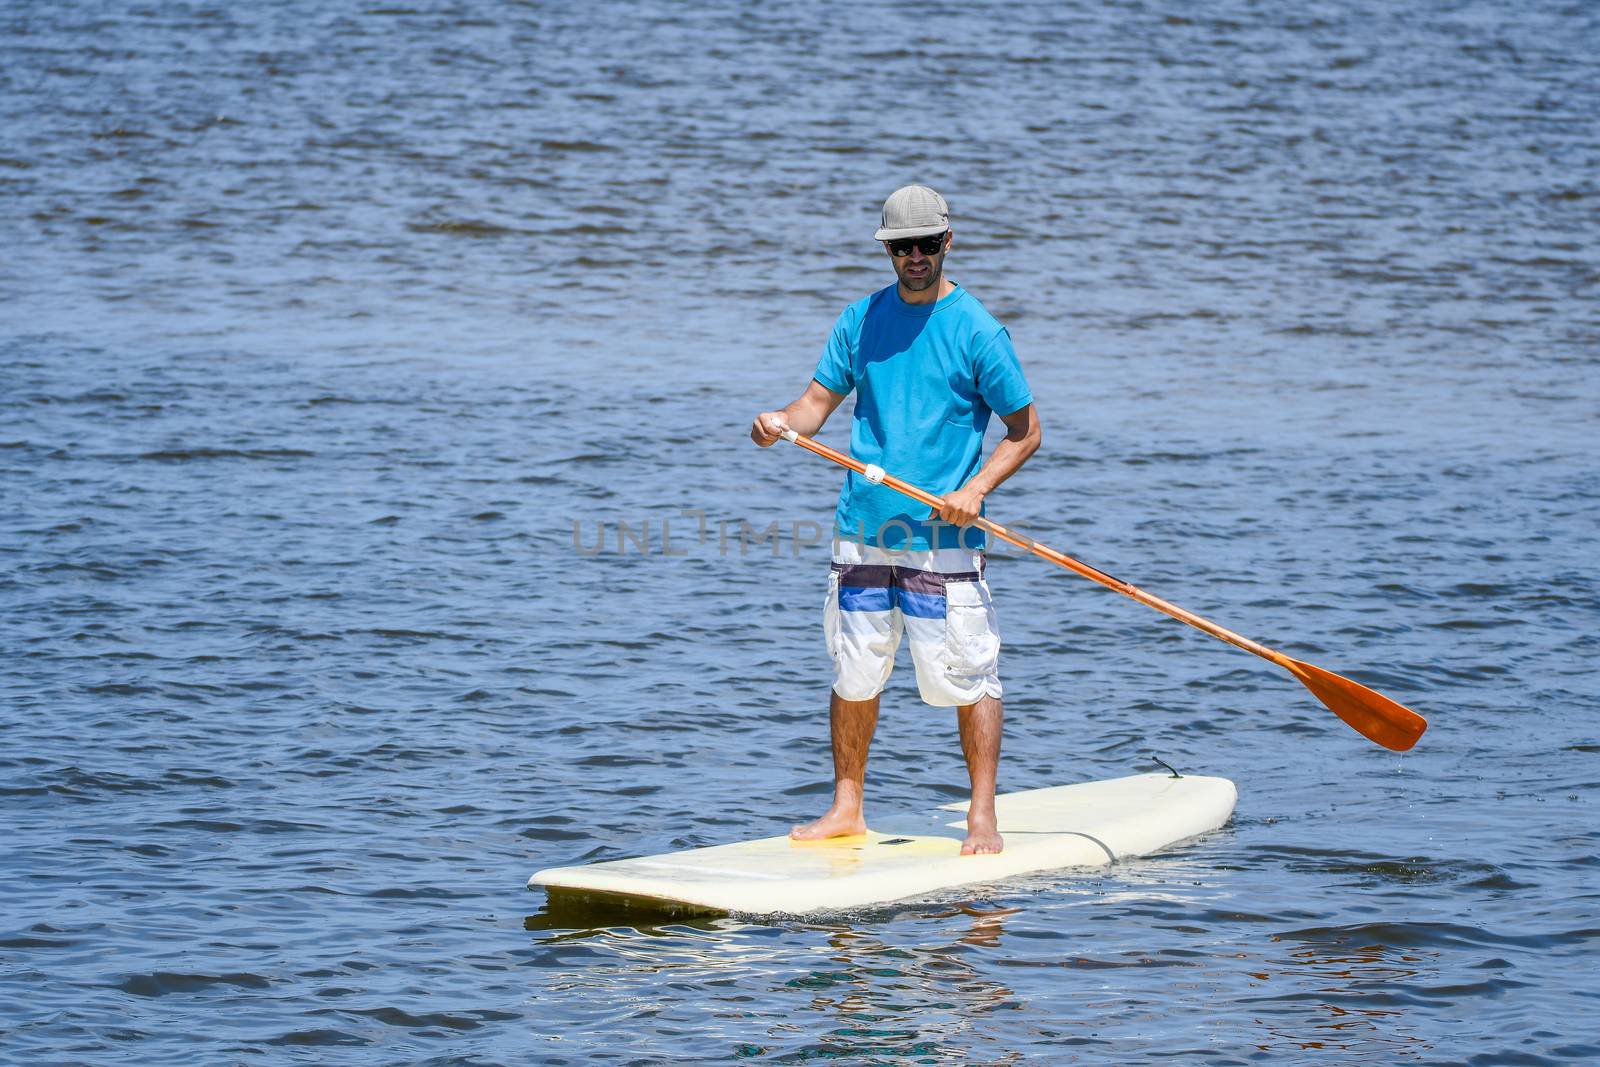 Man stand up paddleboarding on lake. Young man doing watersport on lake. Male tourist in swimwear during summer vacation.